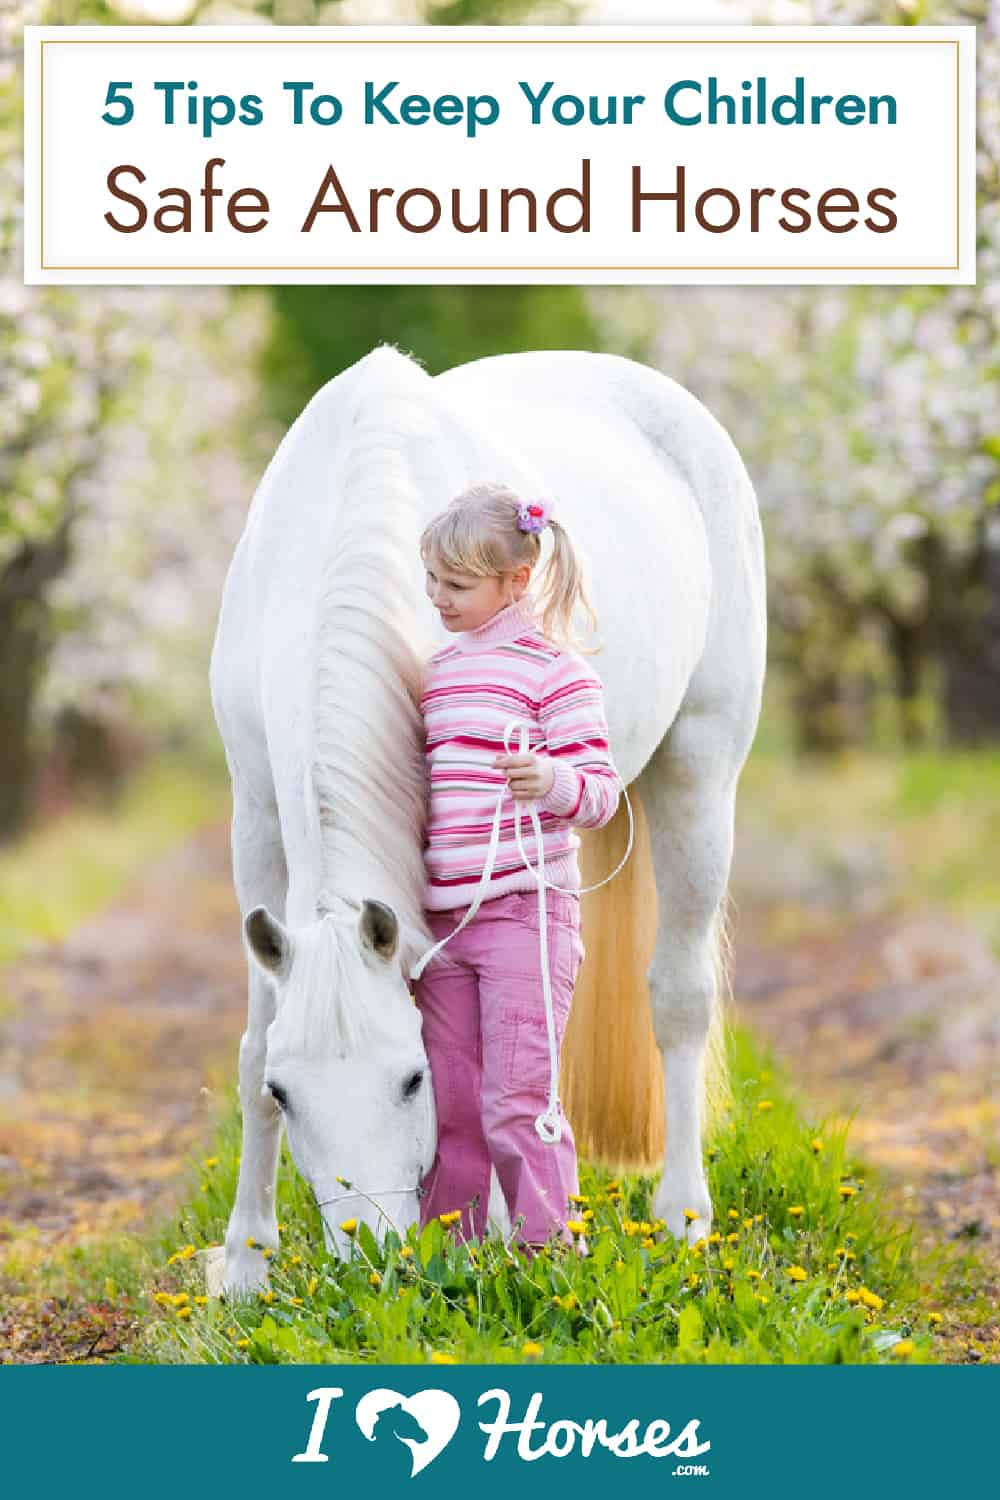 Important Tips For Child Safety Around Horses